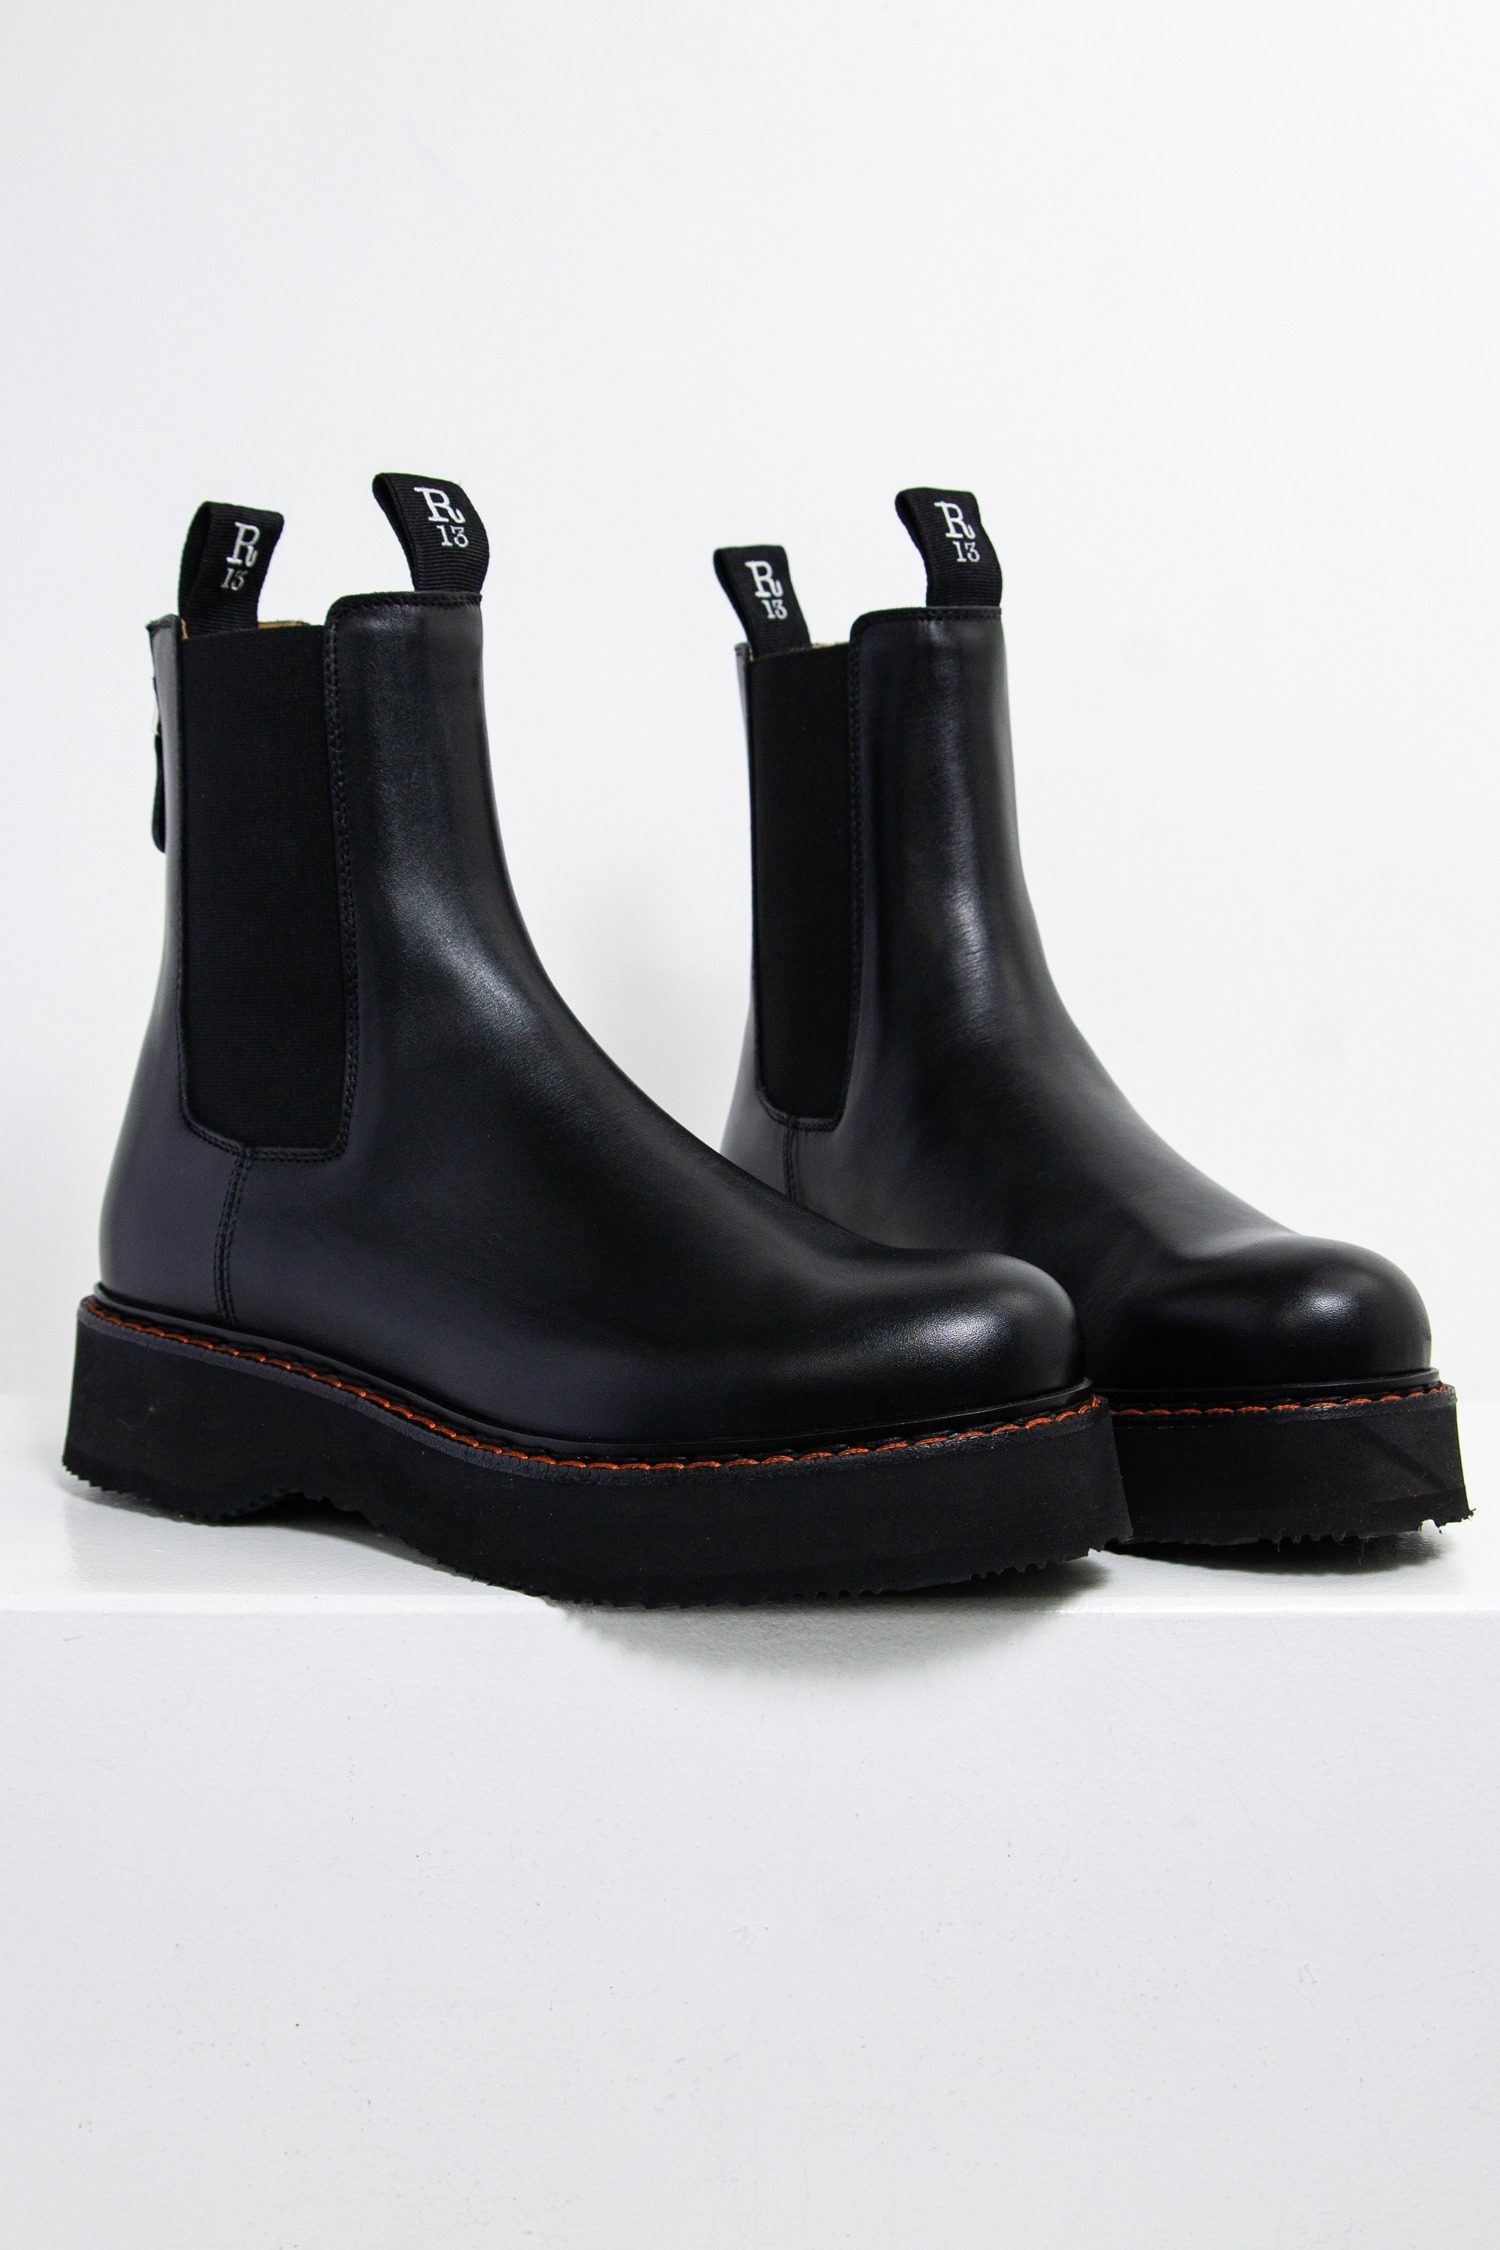 R13 "Single Stack" Chelsea Boots